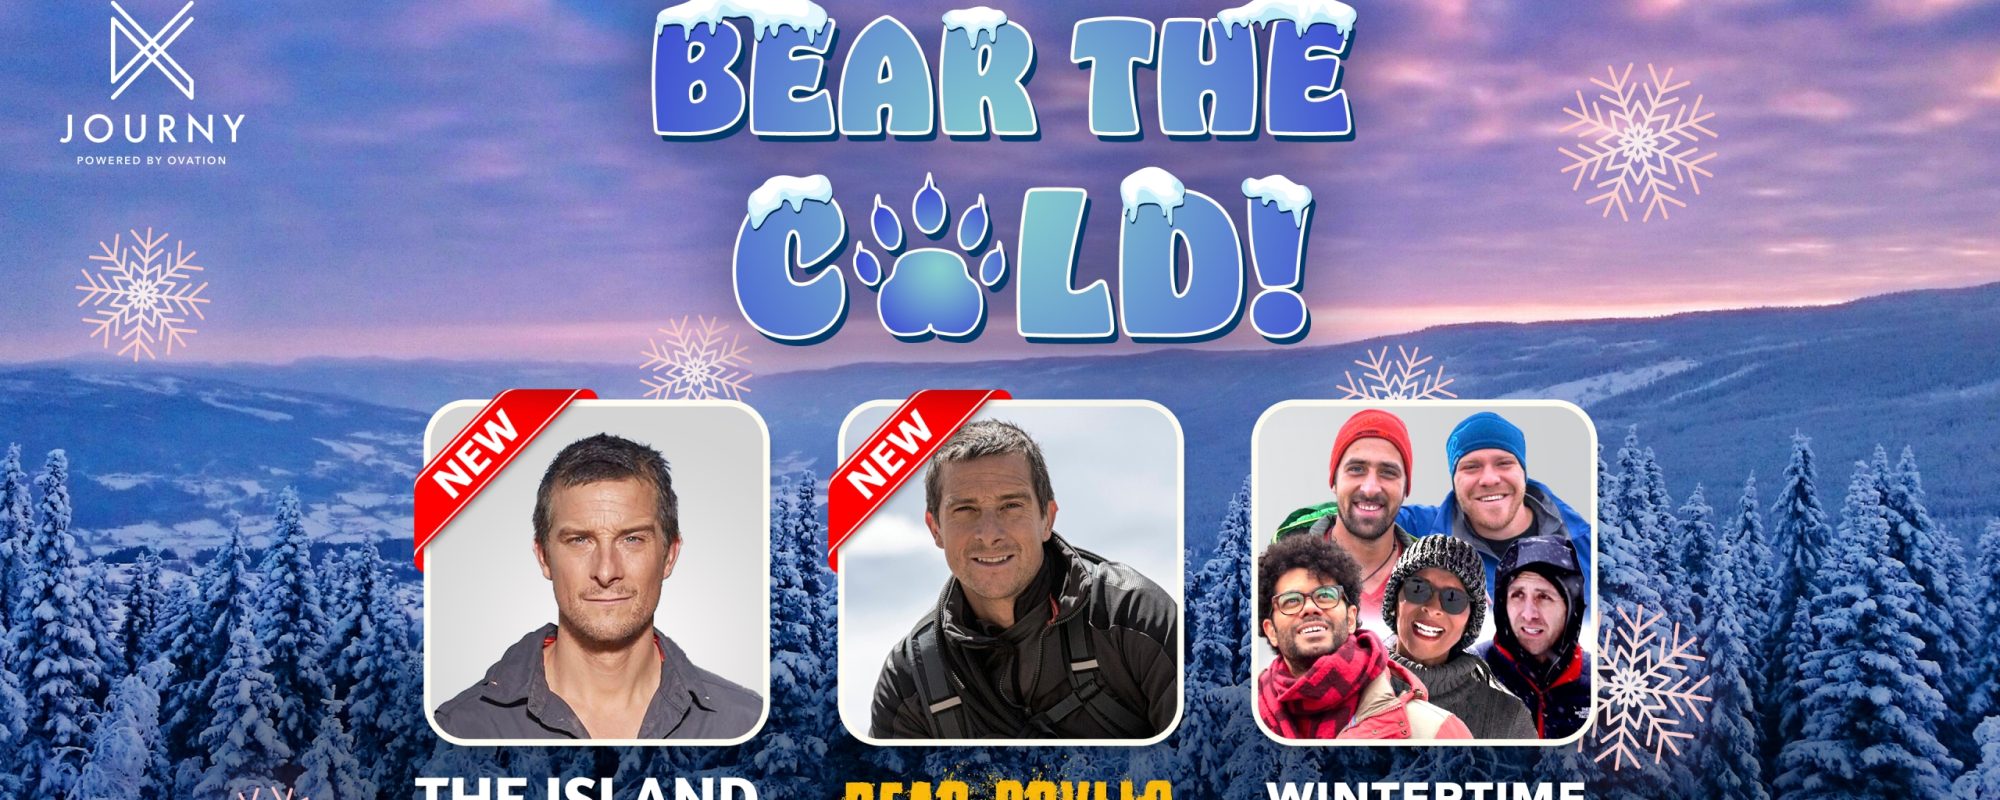 BEAR THE COLD! WITH JOURNY’S WINTER PROGRAMMING